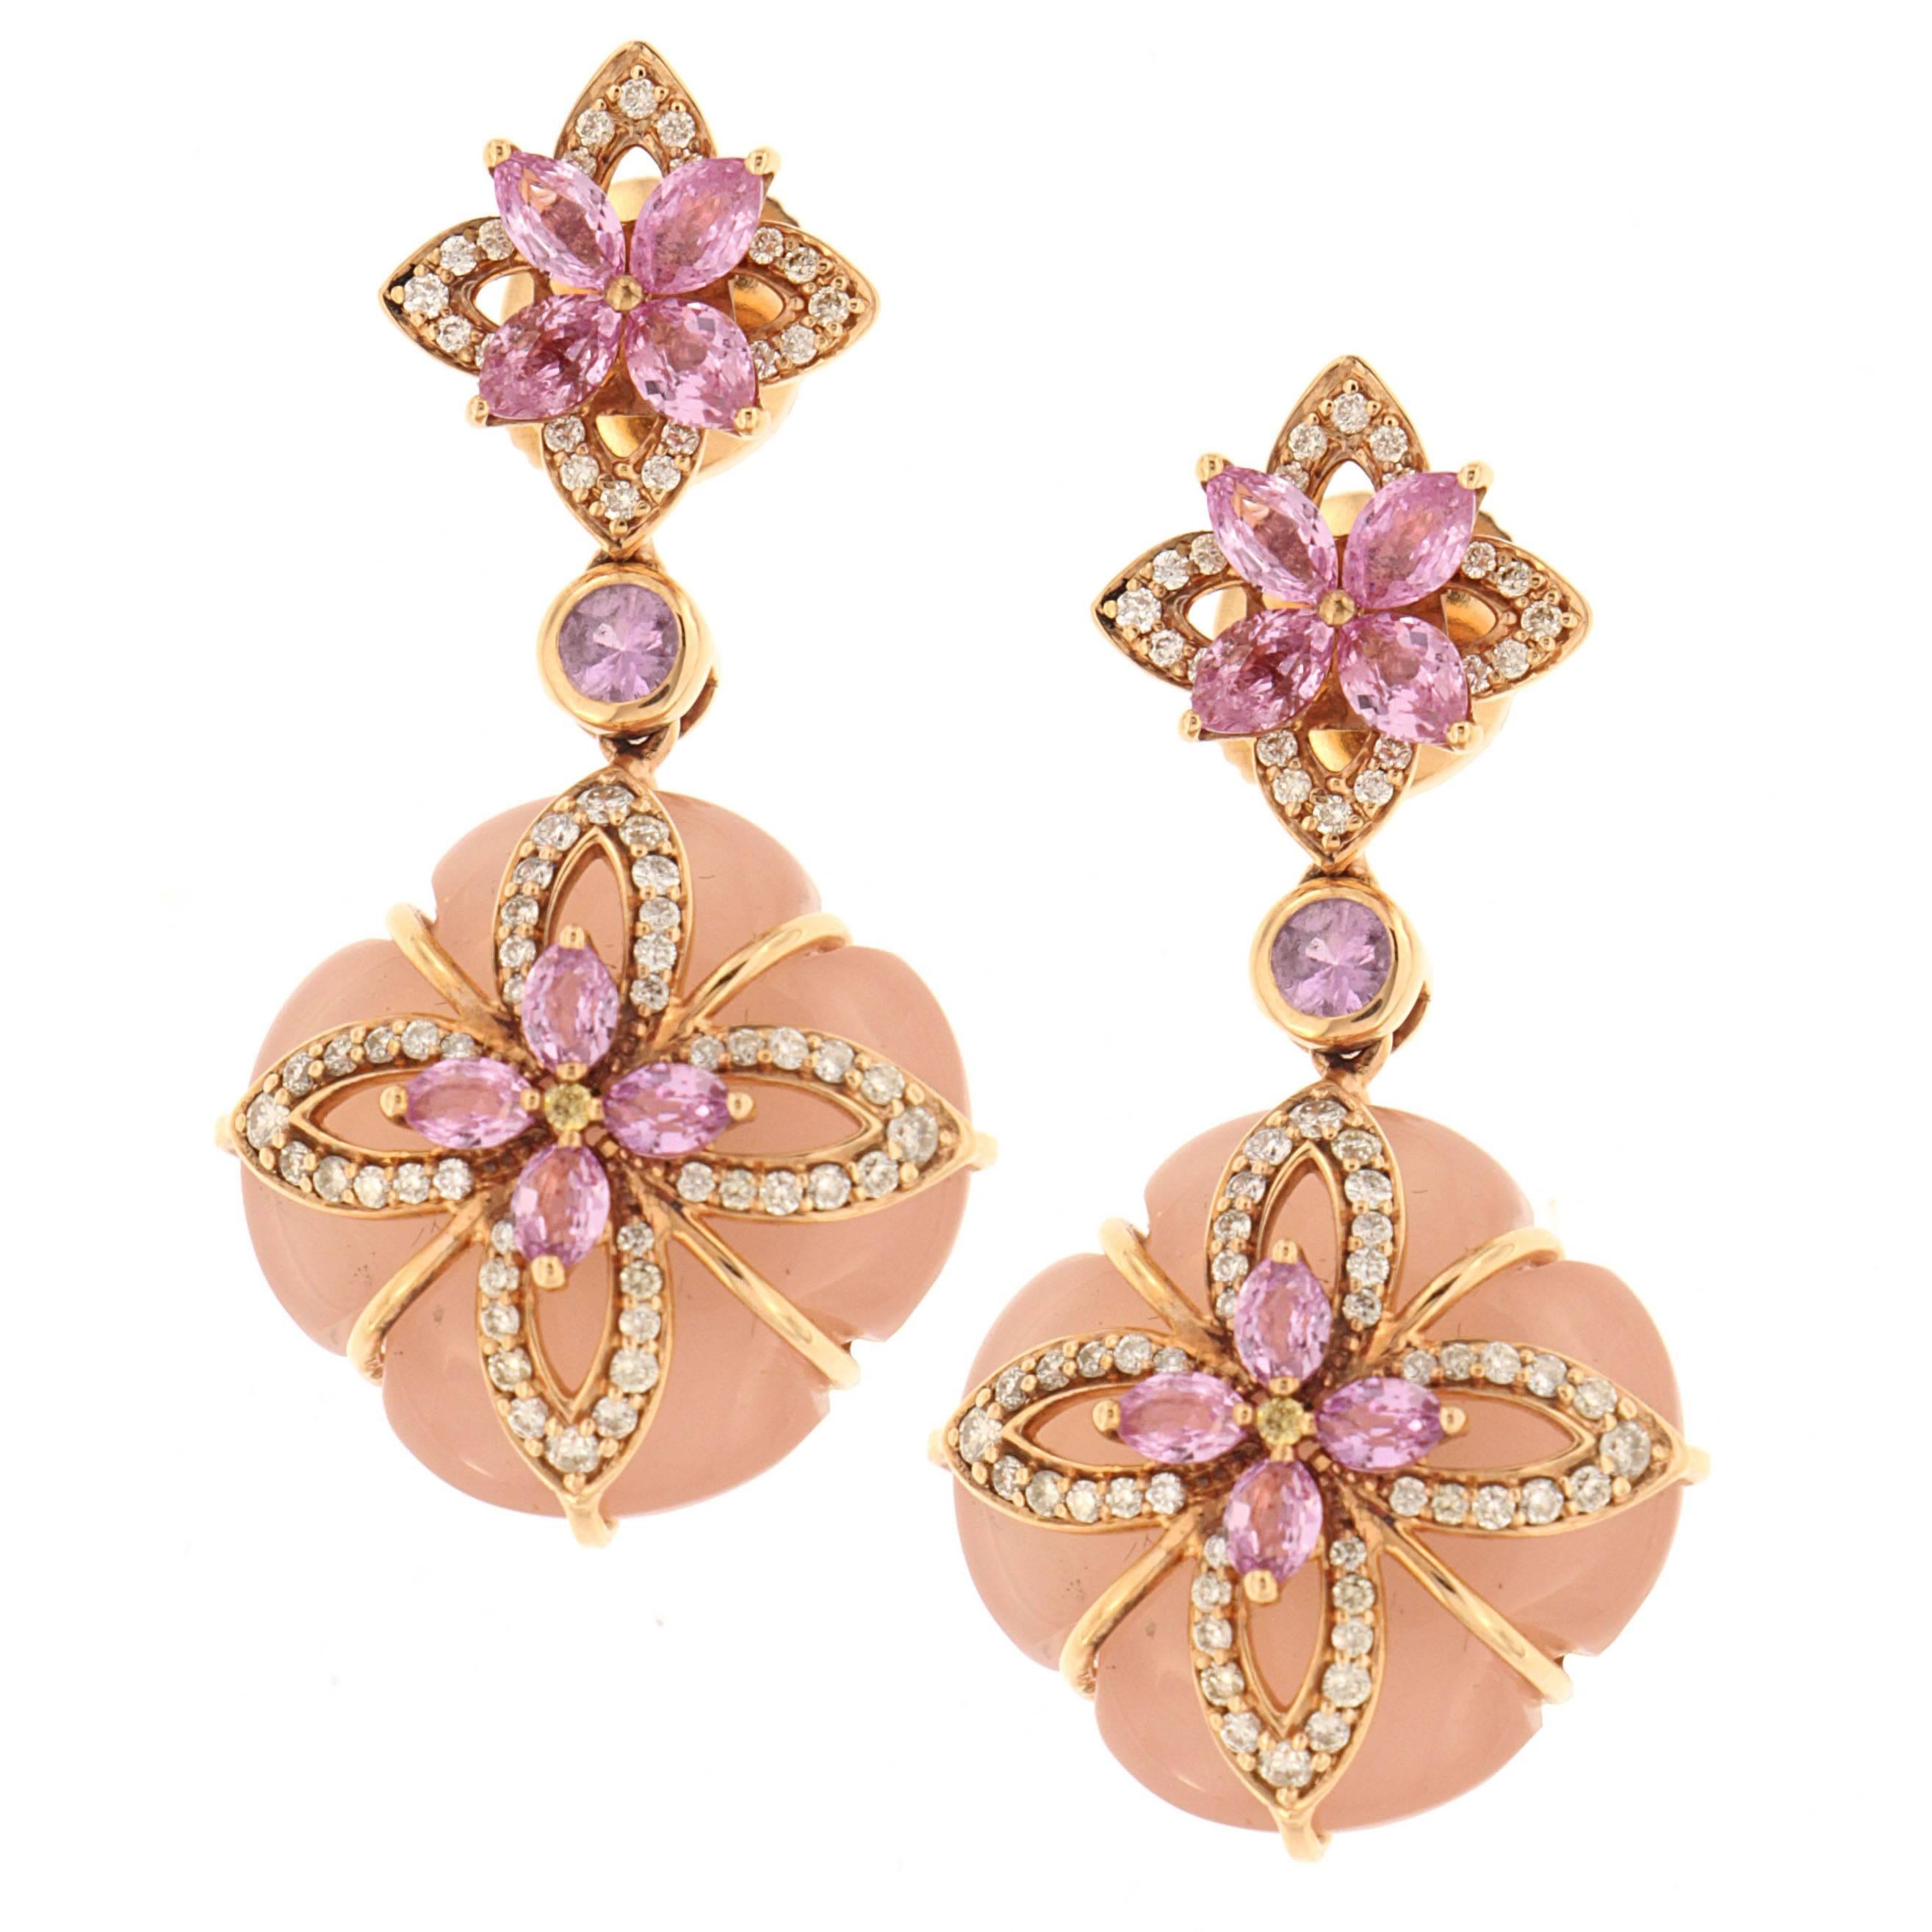 Zorab Creation Pink Chalcedony, White Diamond and Pink Sapphire Drop Earrings For Sale